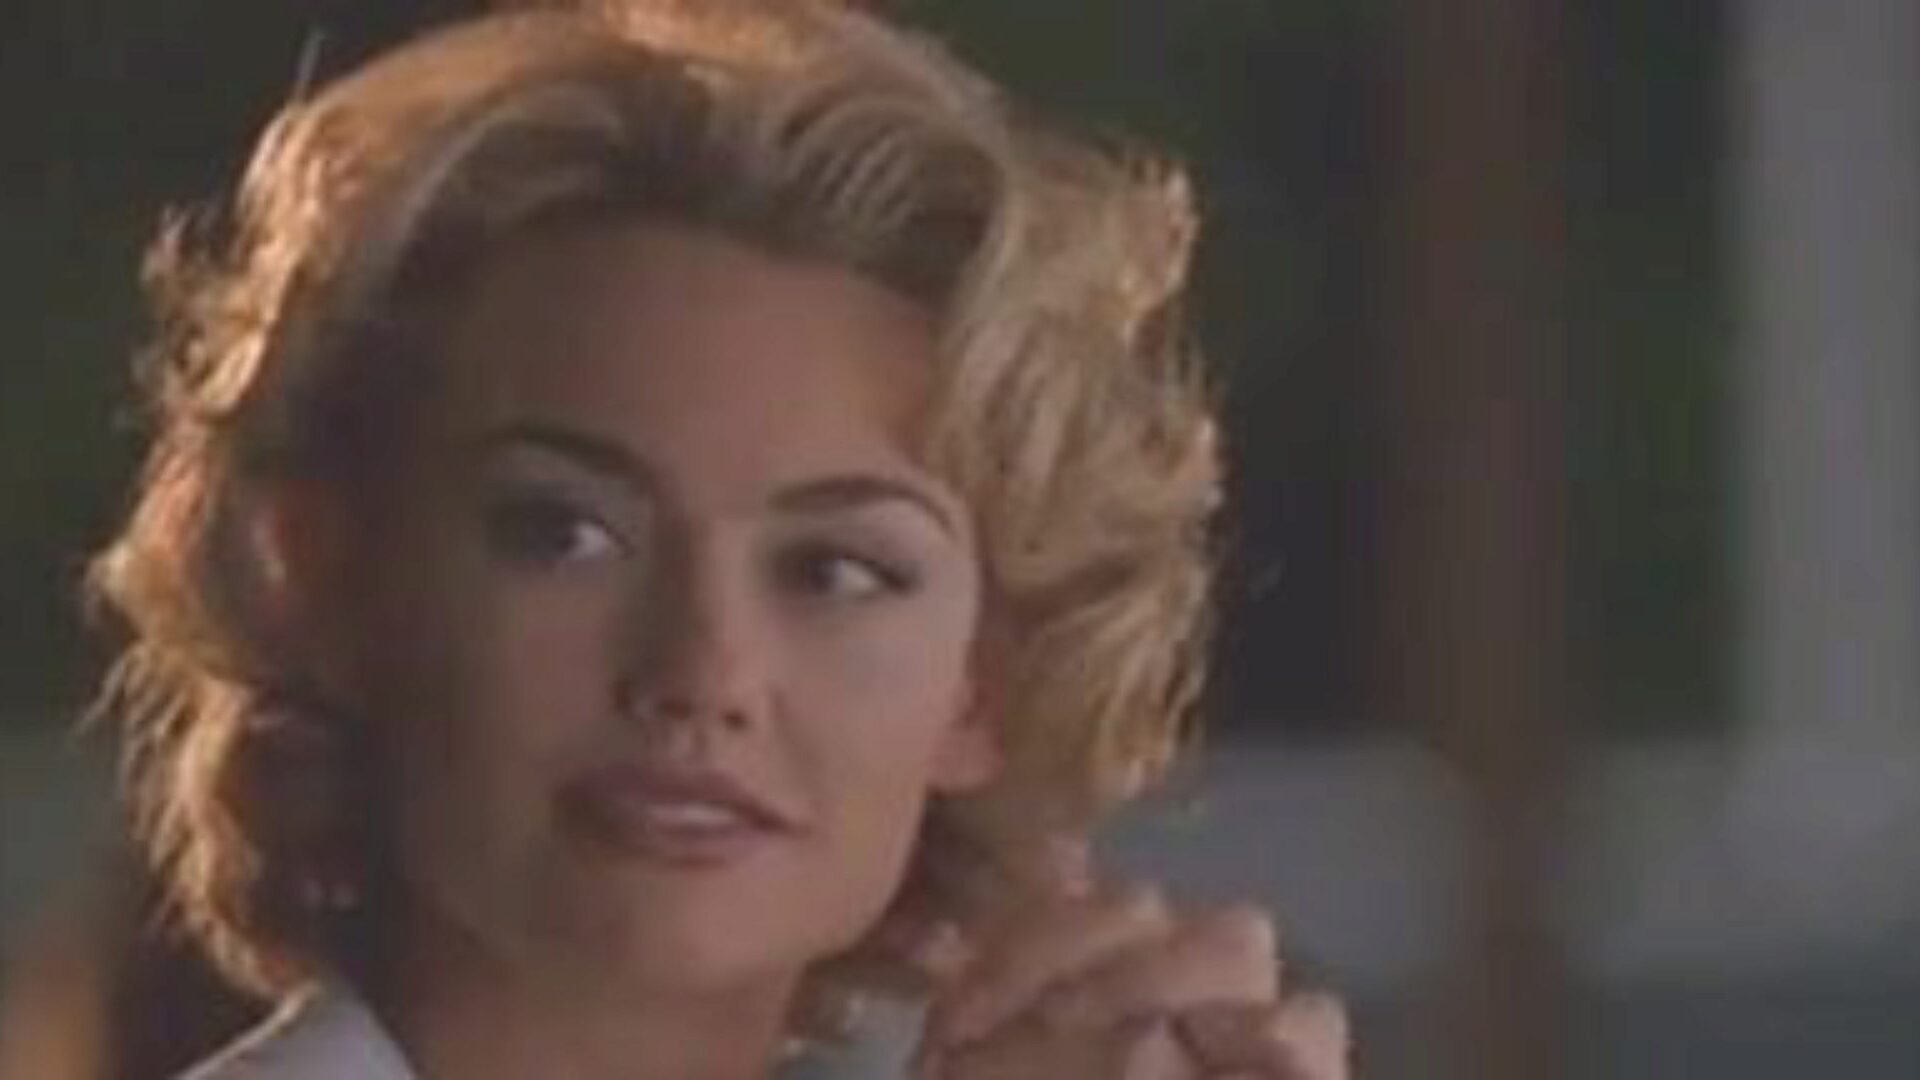 Kelly Carlson - Niptuck 01, Free Celebrity Porn Episode bd See Kelly Carlson - Niptuck 01 clip on xHamster, the almost any worthwhile hookup tube website with tons of free Celebrity Blond & Playgirl pornography movie vignettes